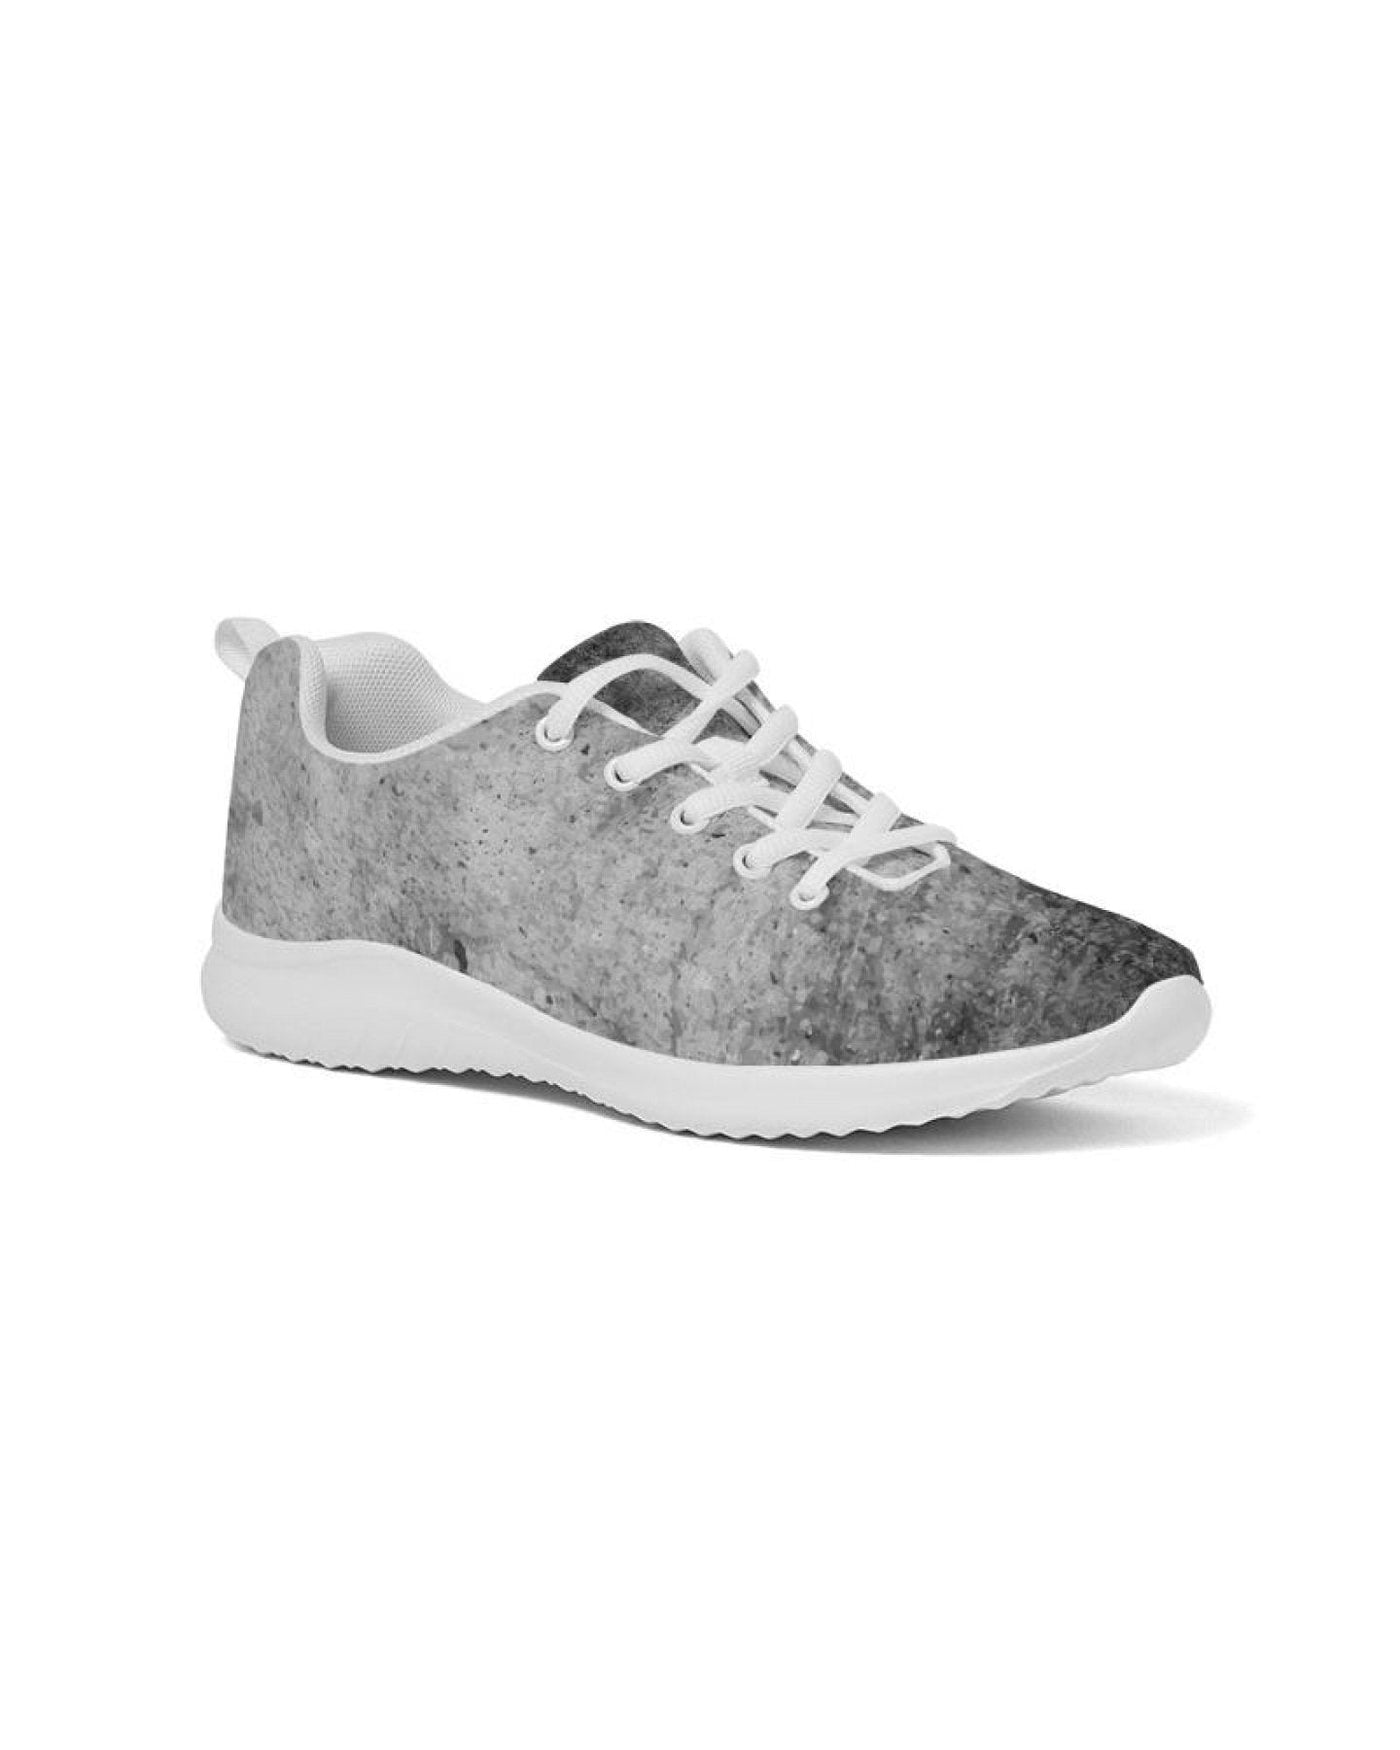 Womens Sneakers - Grey Tie-dye Style Canvas Sports Shoes / Running - Womens |